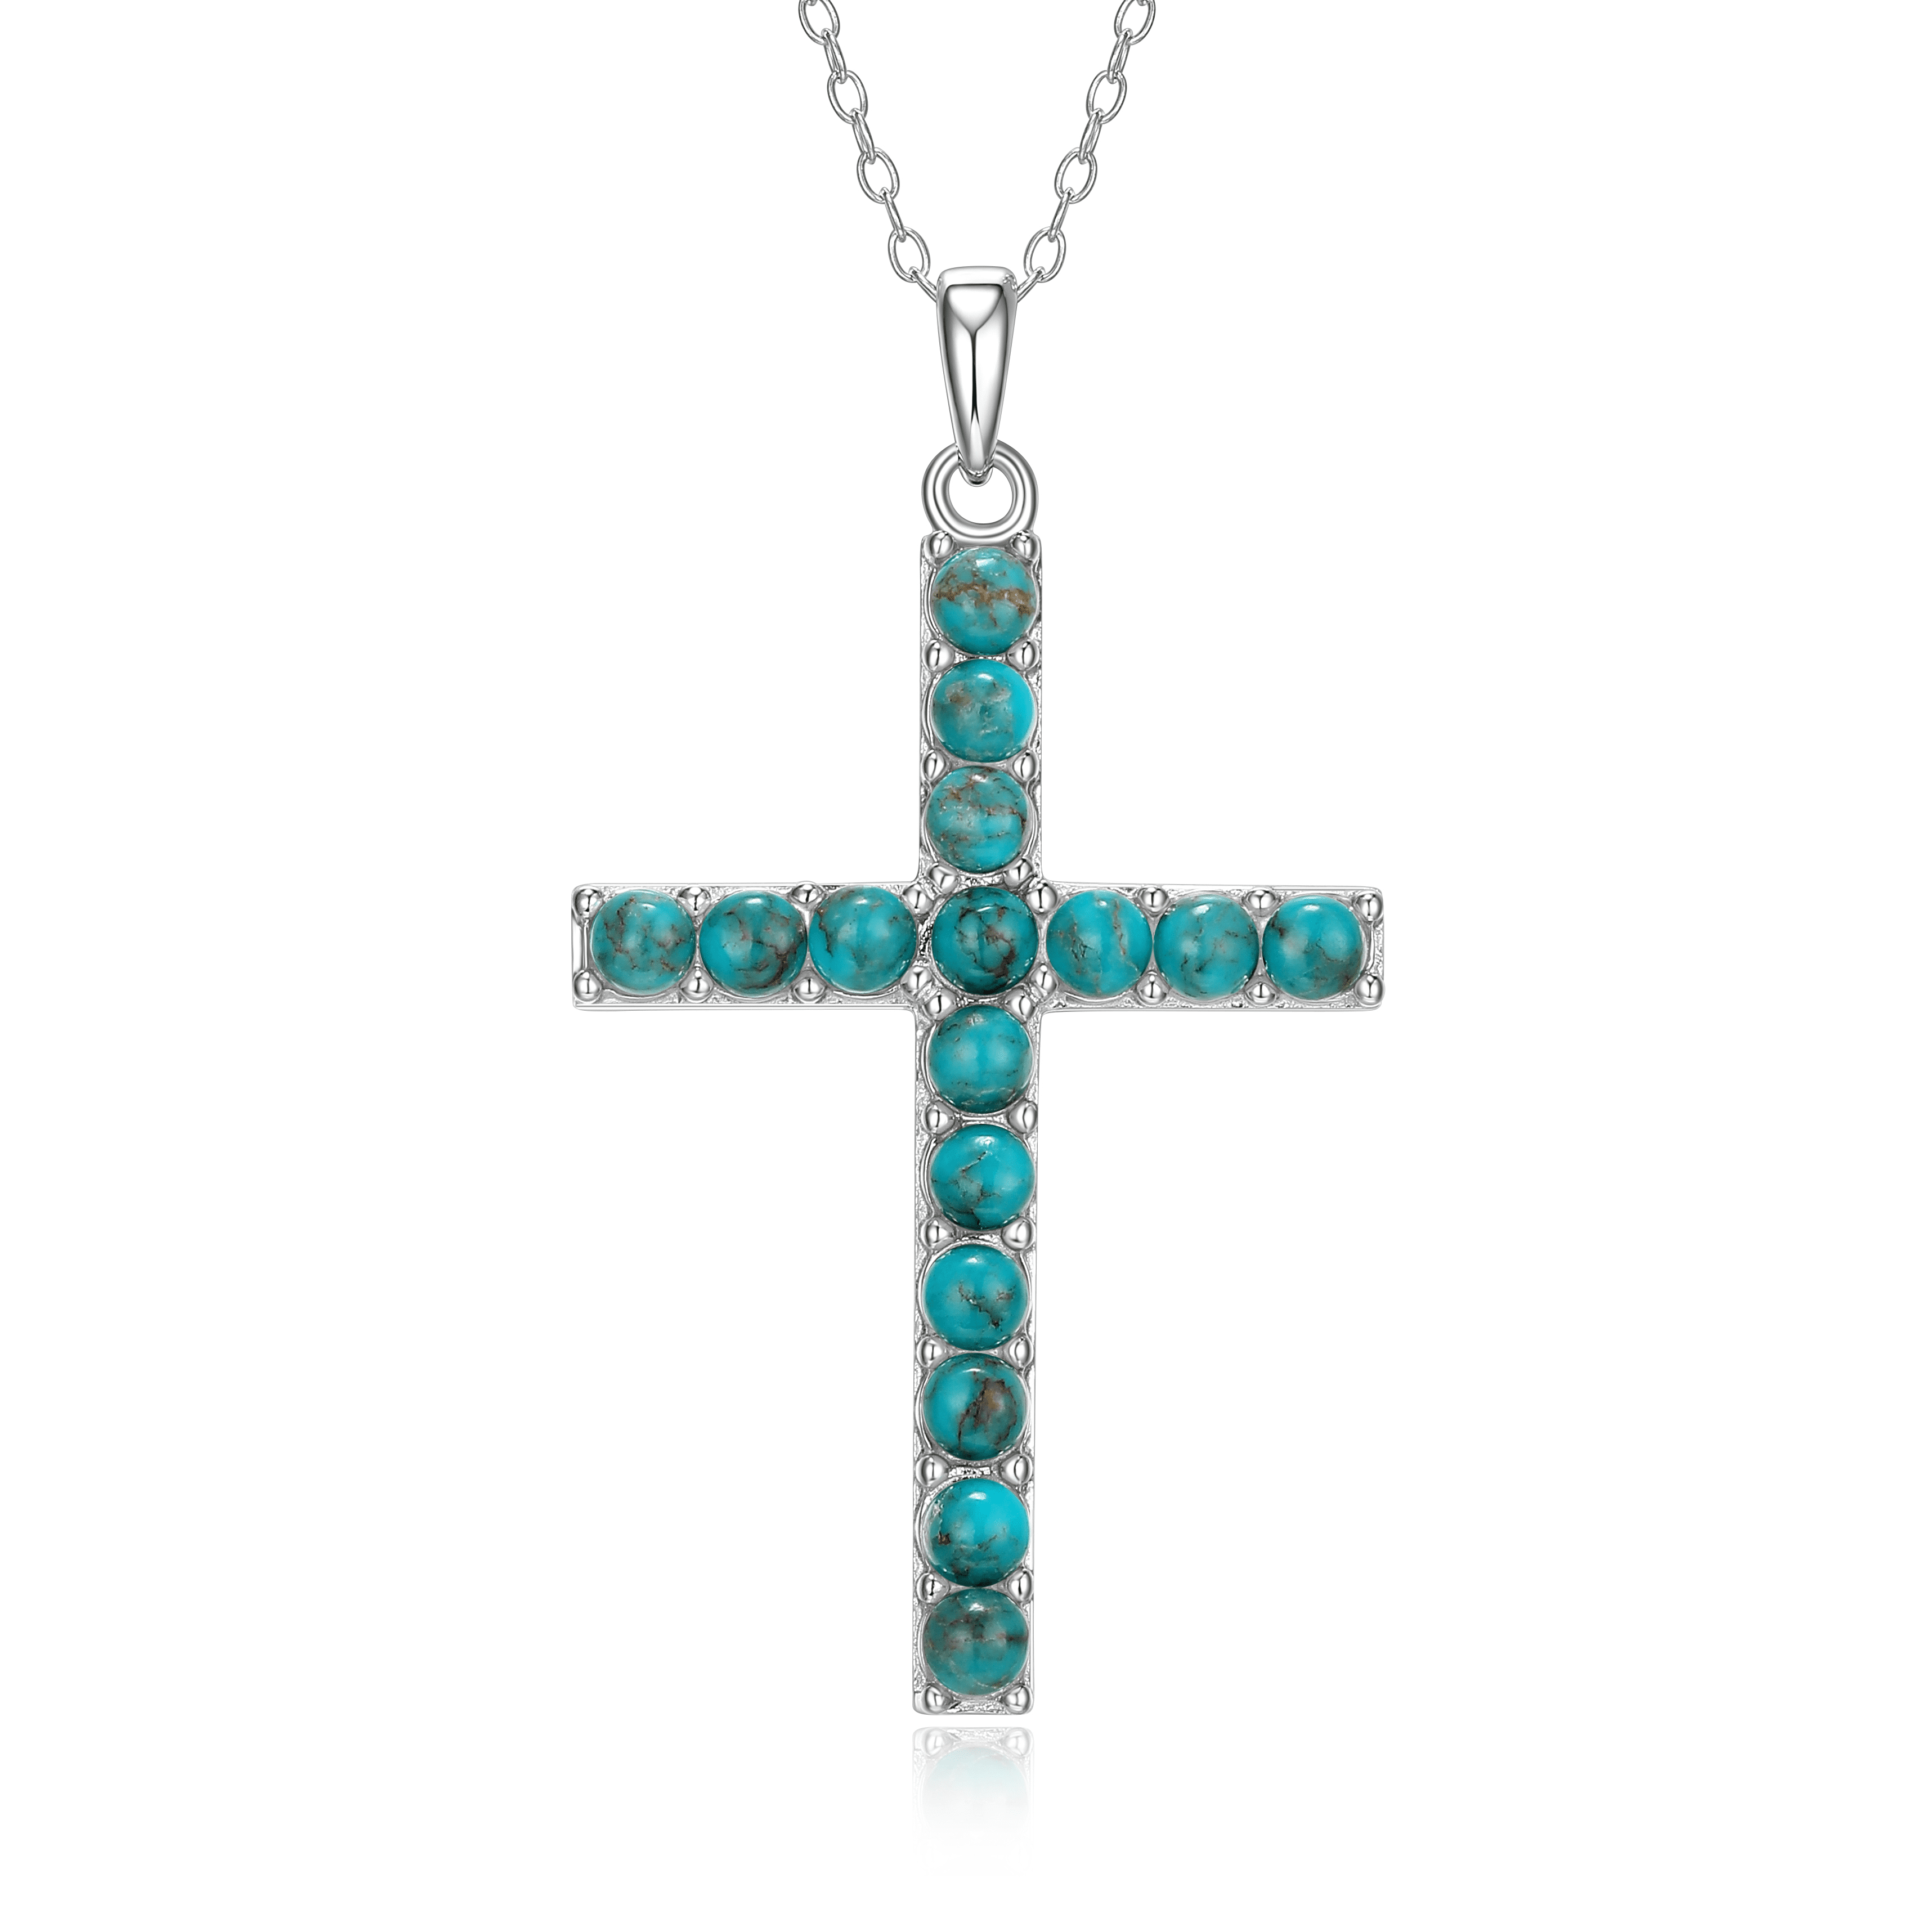 Men's Turquoise Cross Necklace - Cattle Kate